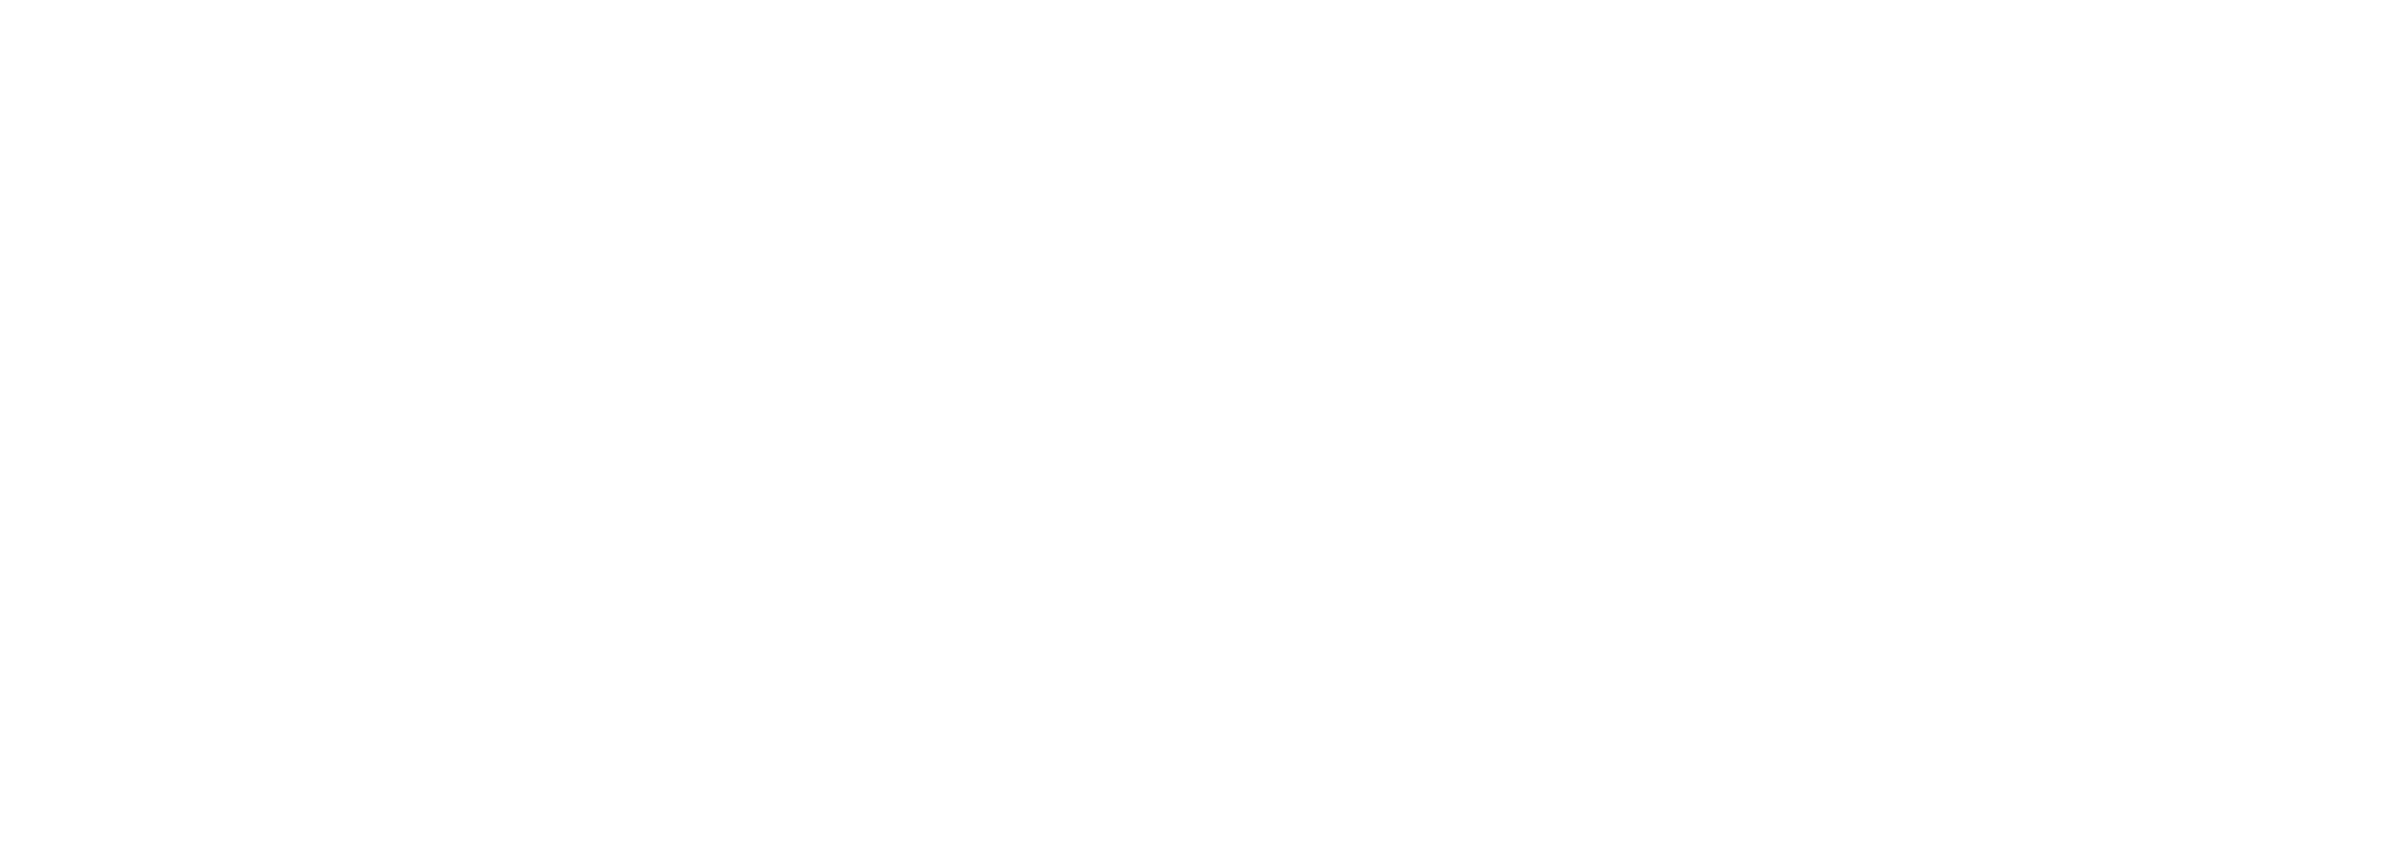 Wave Collection